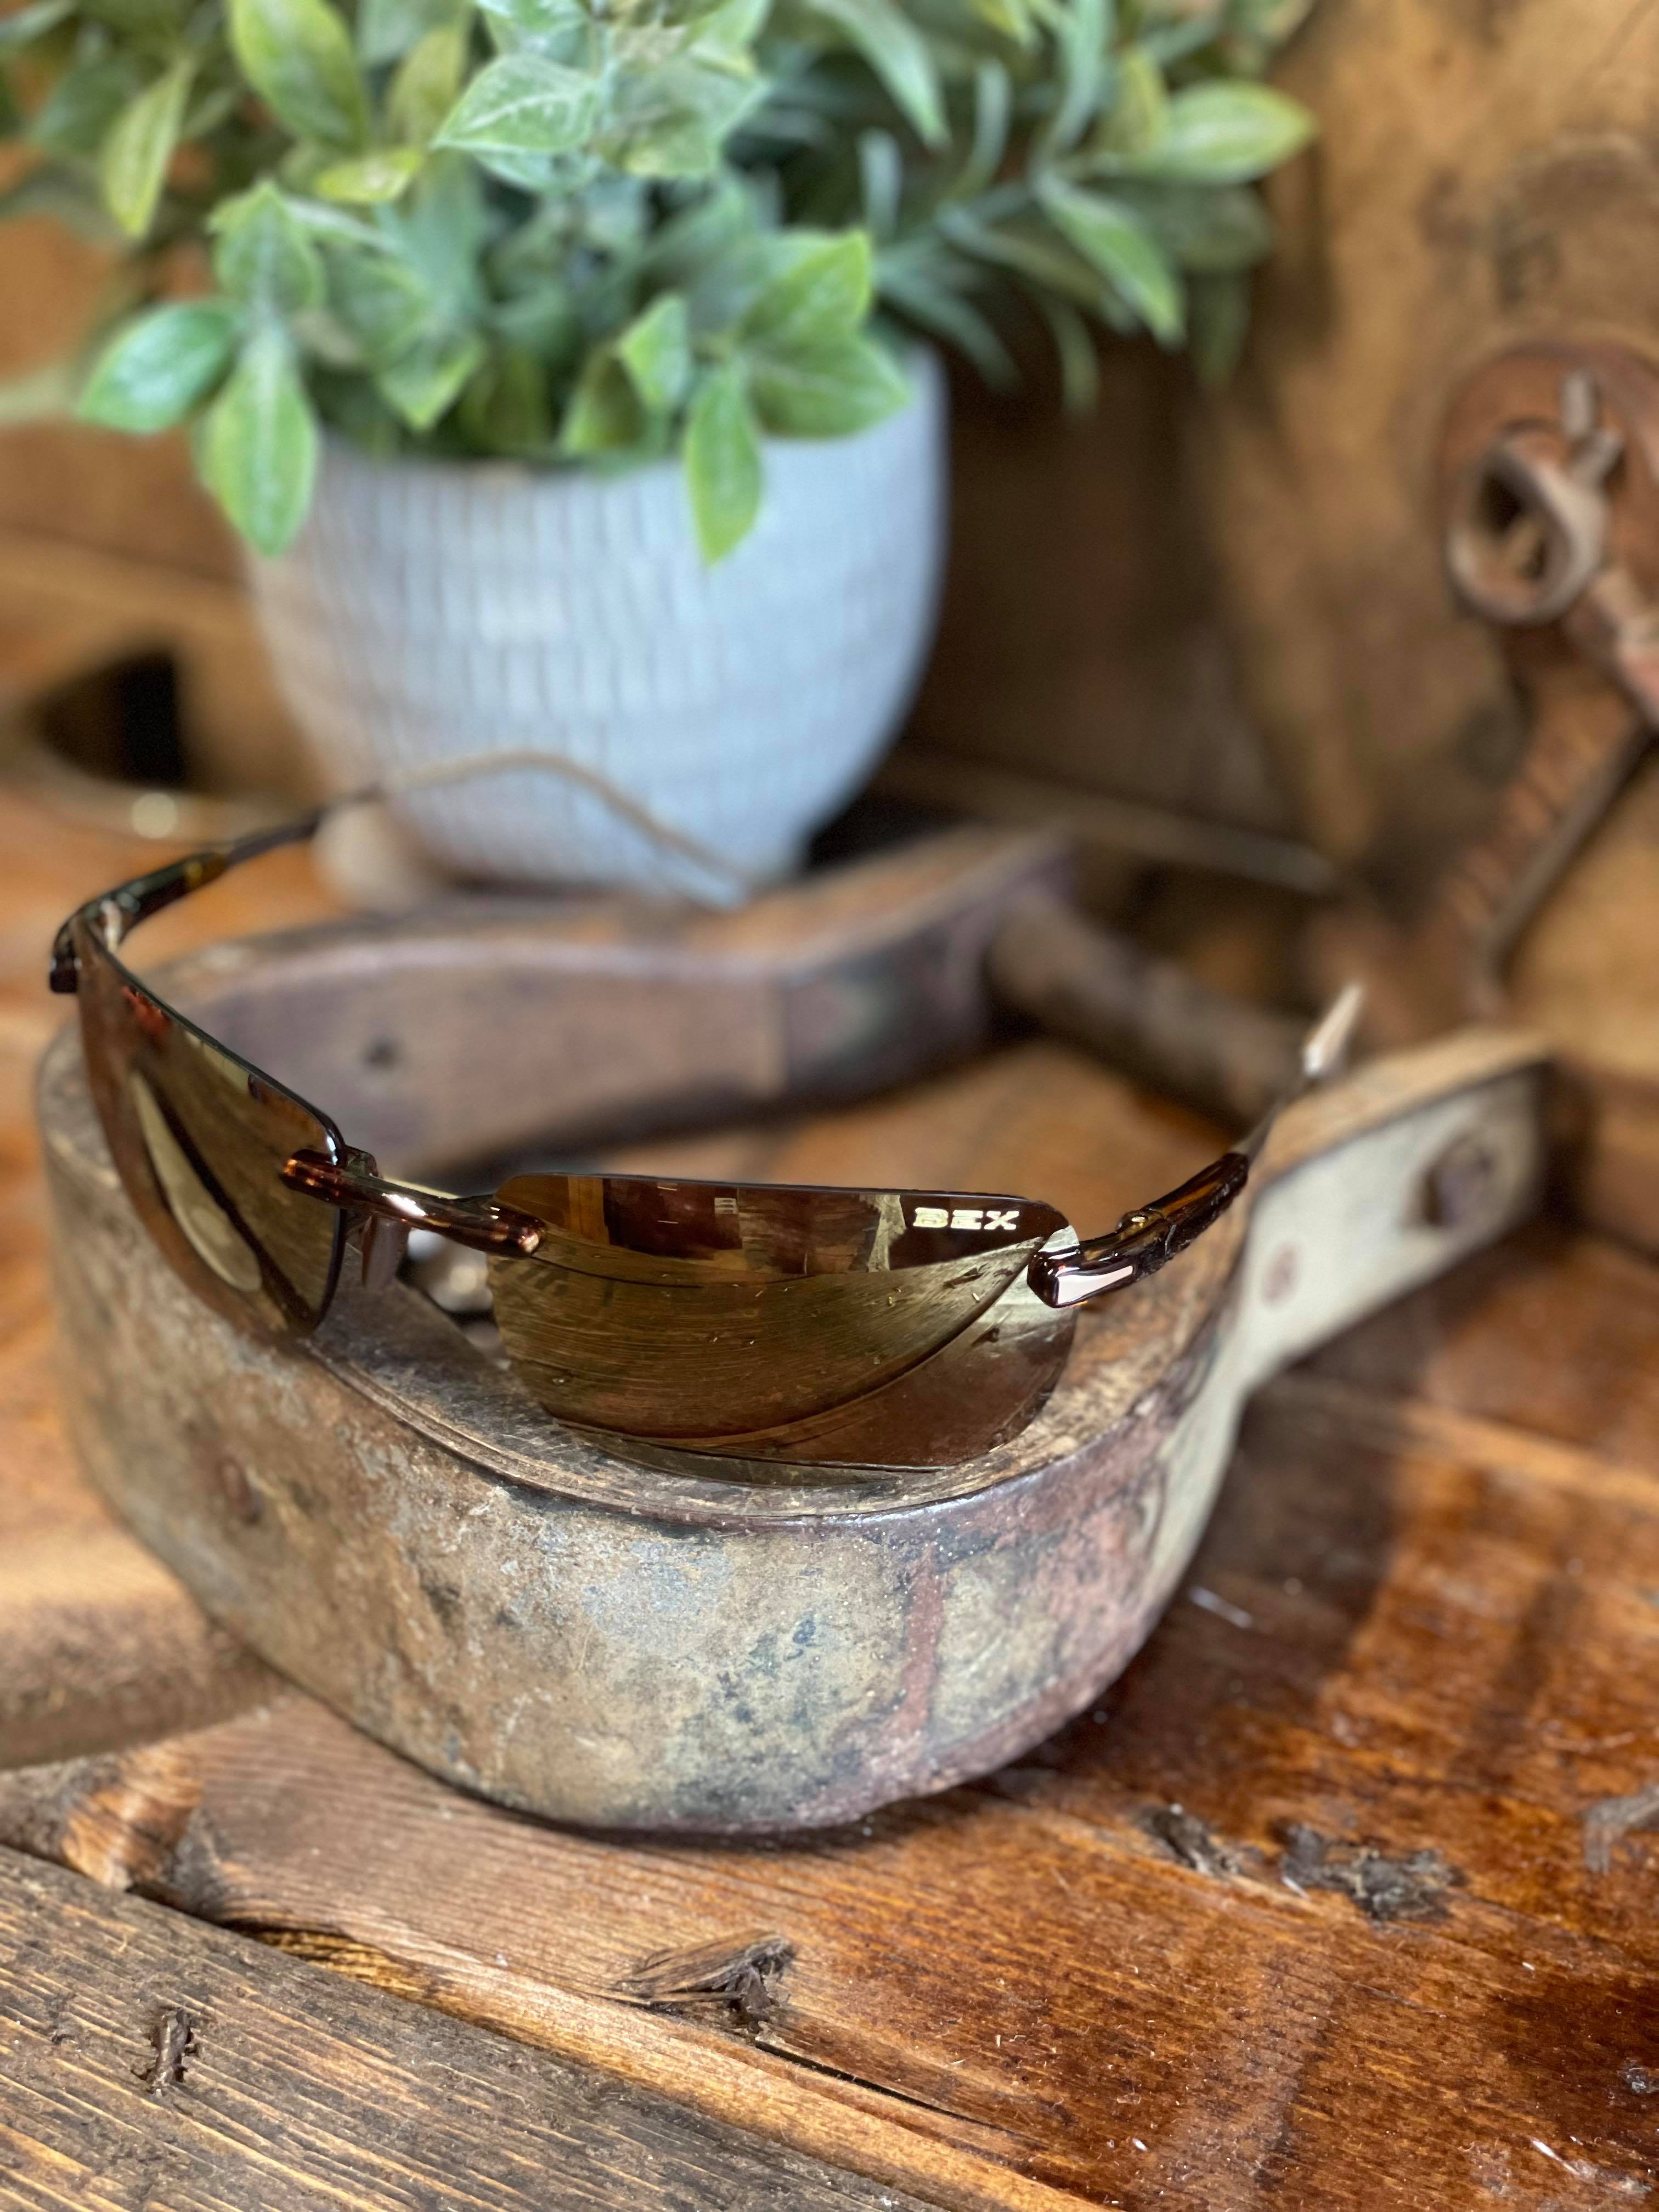 BEX Brackley X Tortoise/Brown-Sunglasses-Bex Sunglasses-Lucky J Boots & More, Women's, Men's, & Kids Western Store Located in Carthage, MO